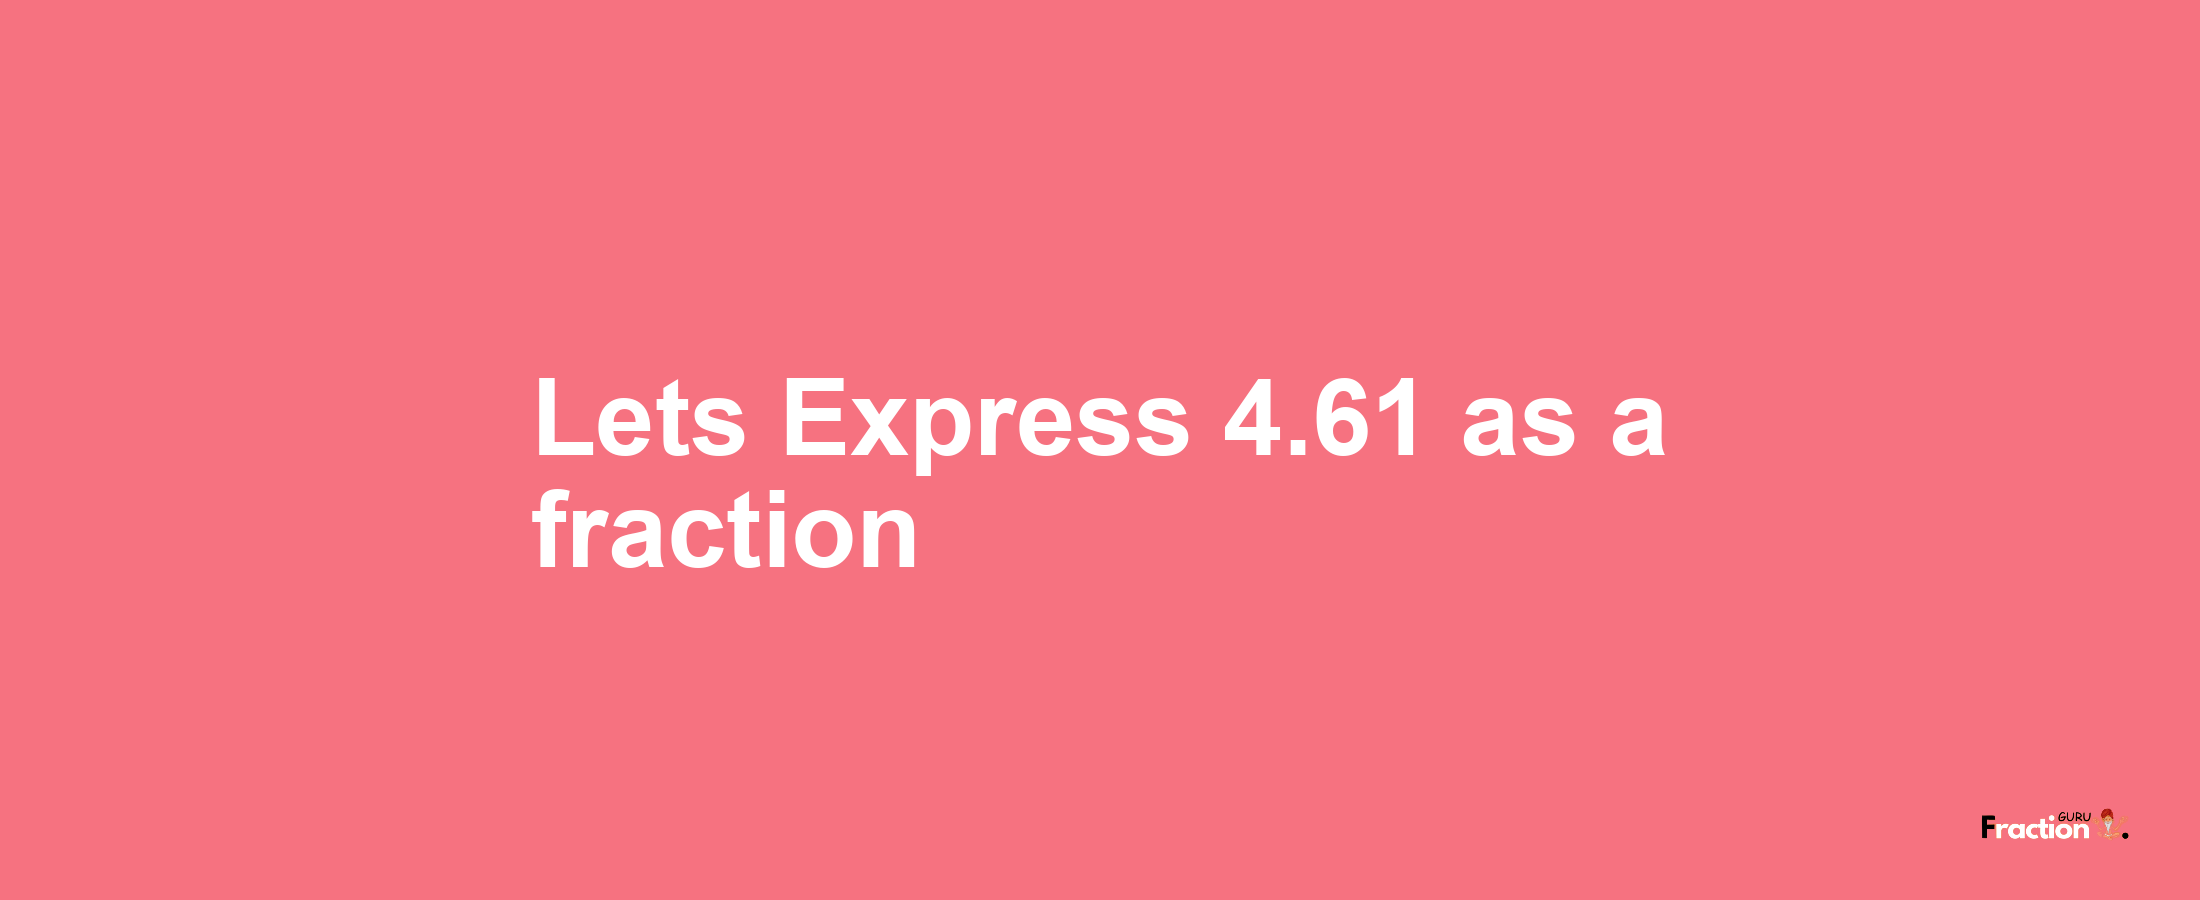 Lets Express 4.61 as afraction